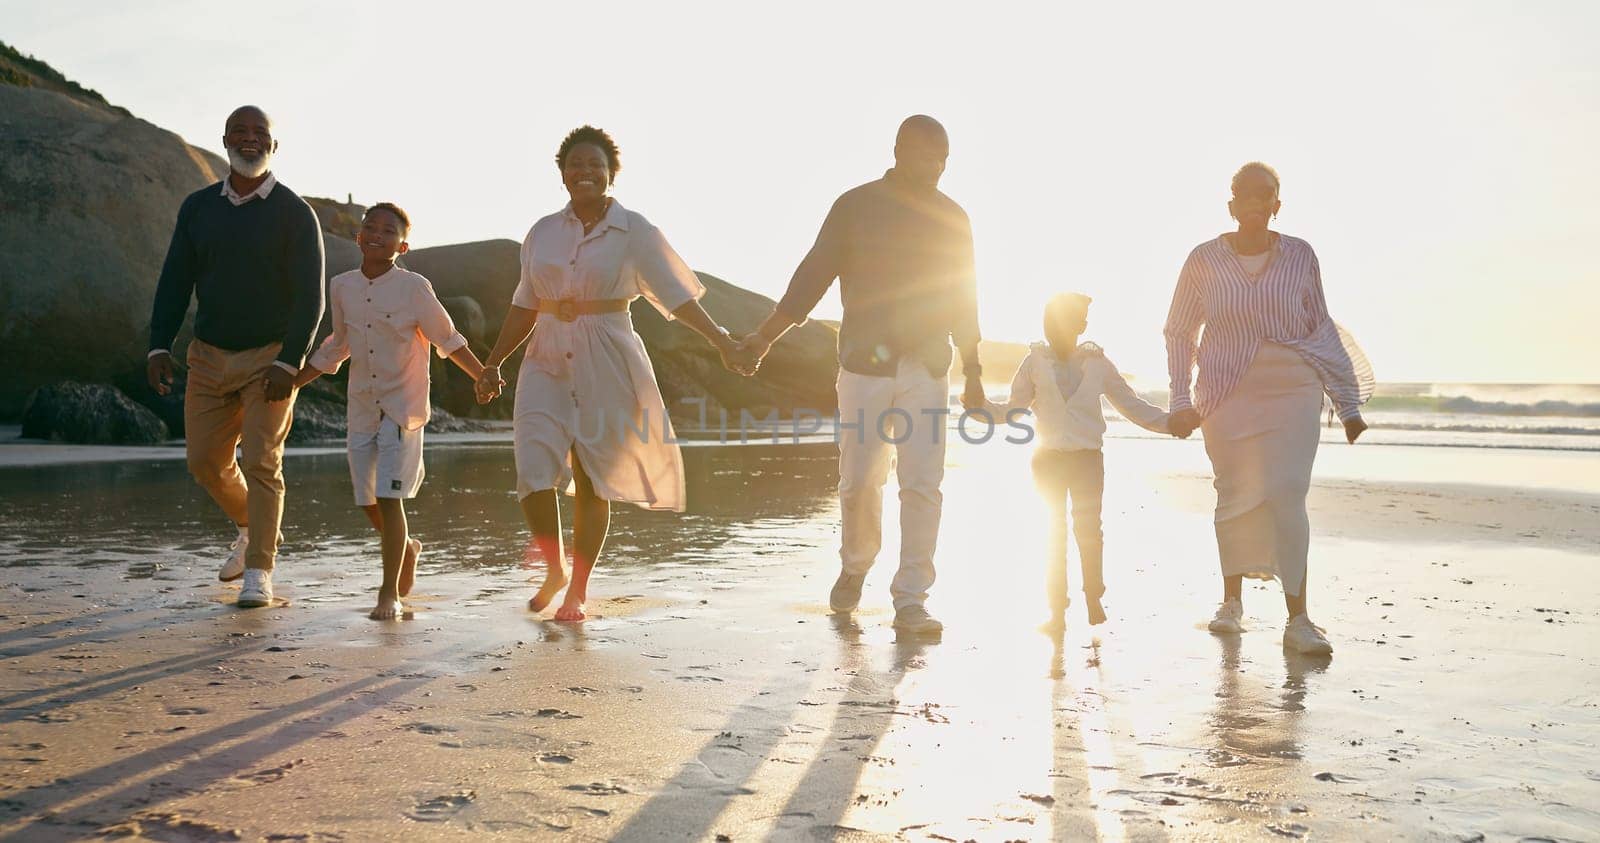 Family, fun and holding hands at beach, support and unity or trust, ocean and solidarity or care. Happy black people, sea and love or joy, bonding or water on vacation, holiday and laughing at sunset.